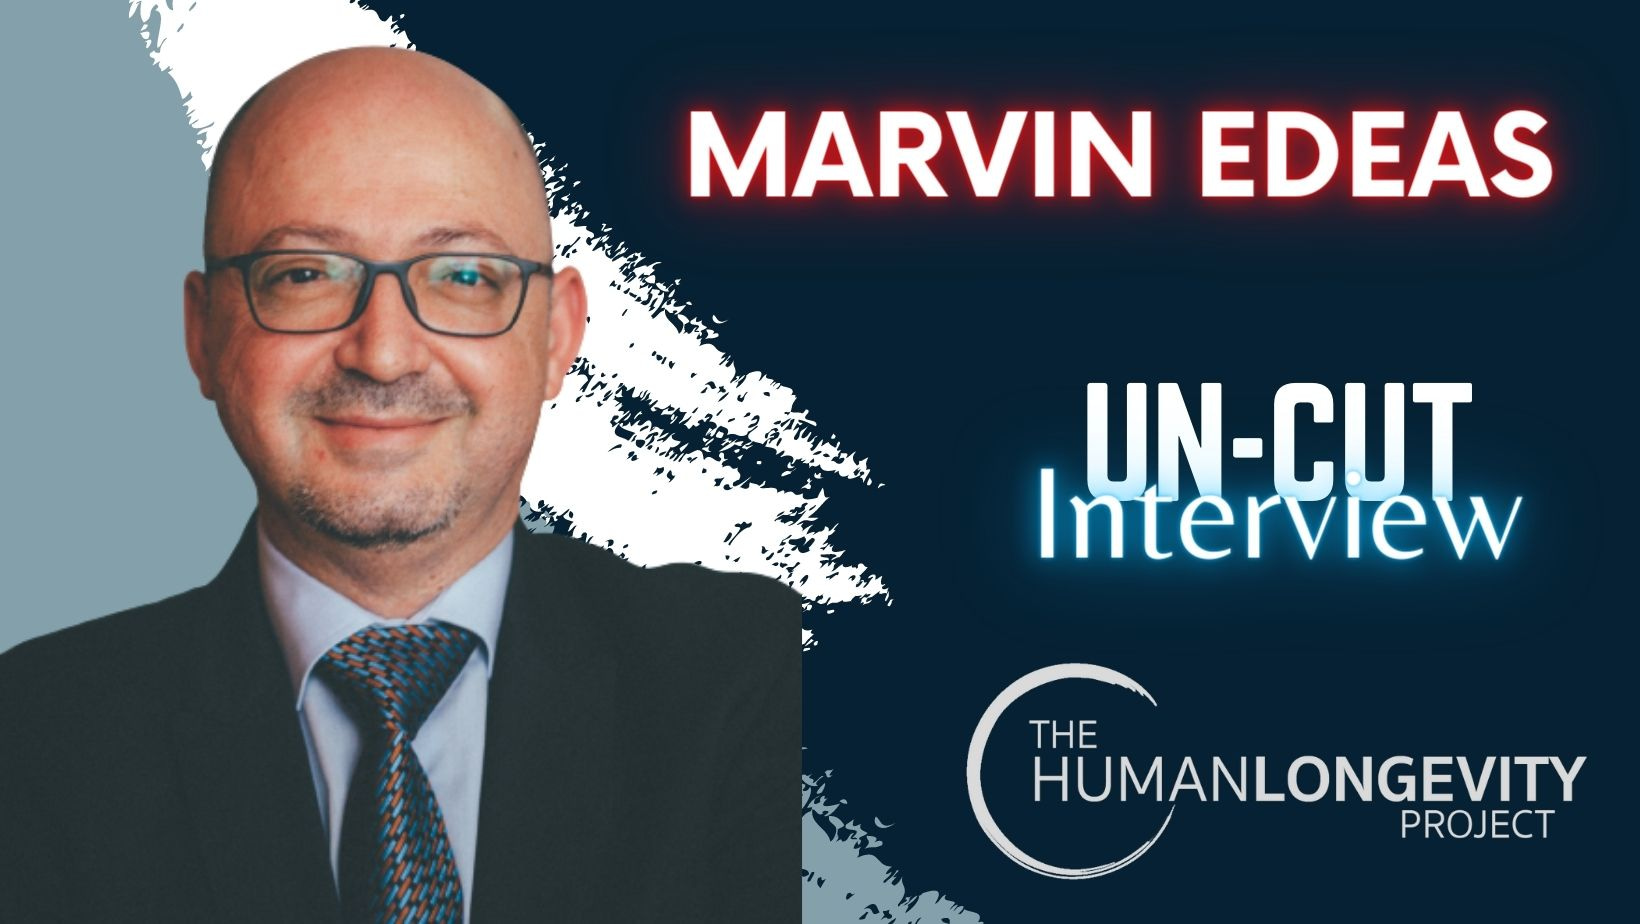 Human Longevity Project Uncut Interview With Dr. Marvin Edeas